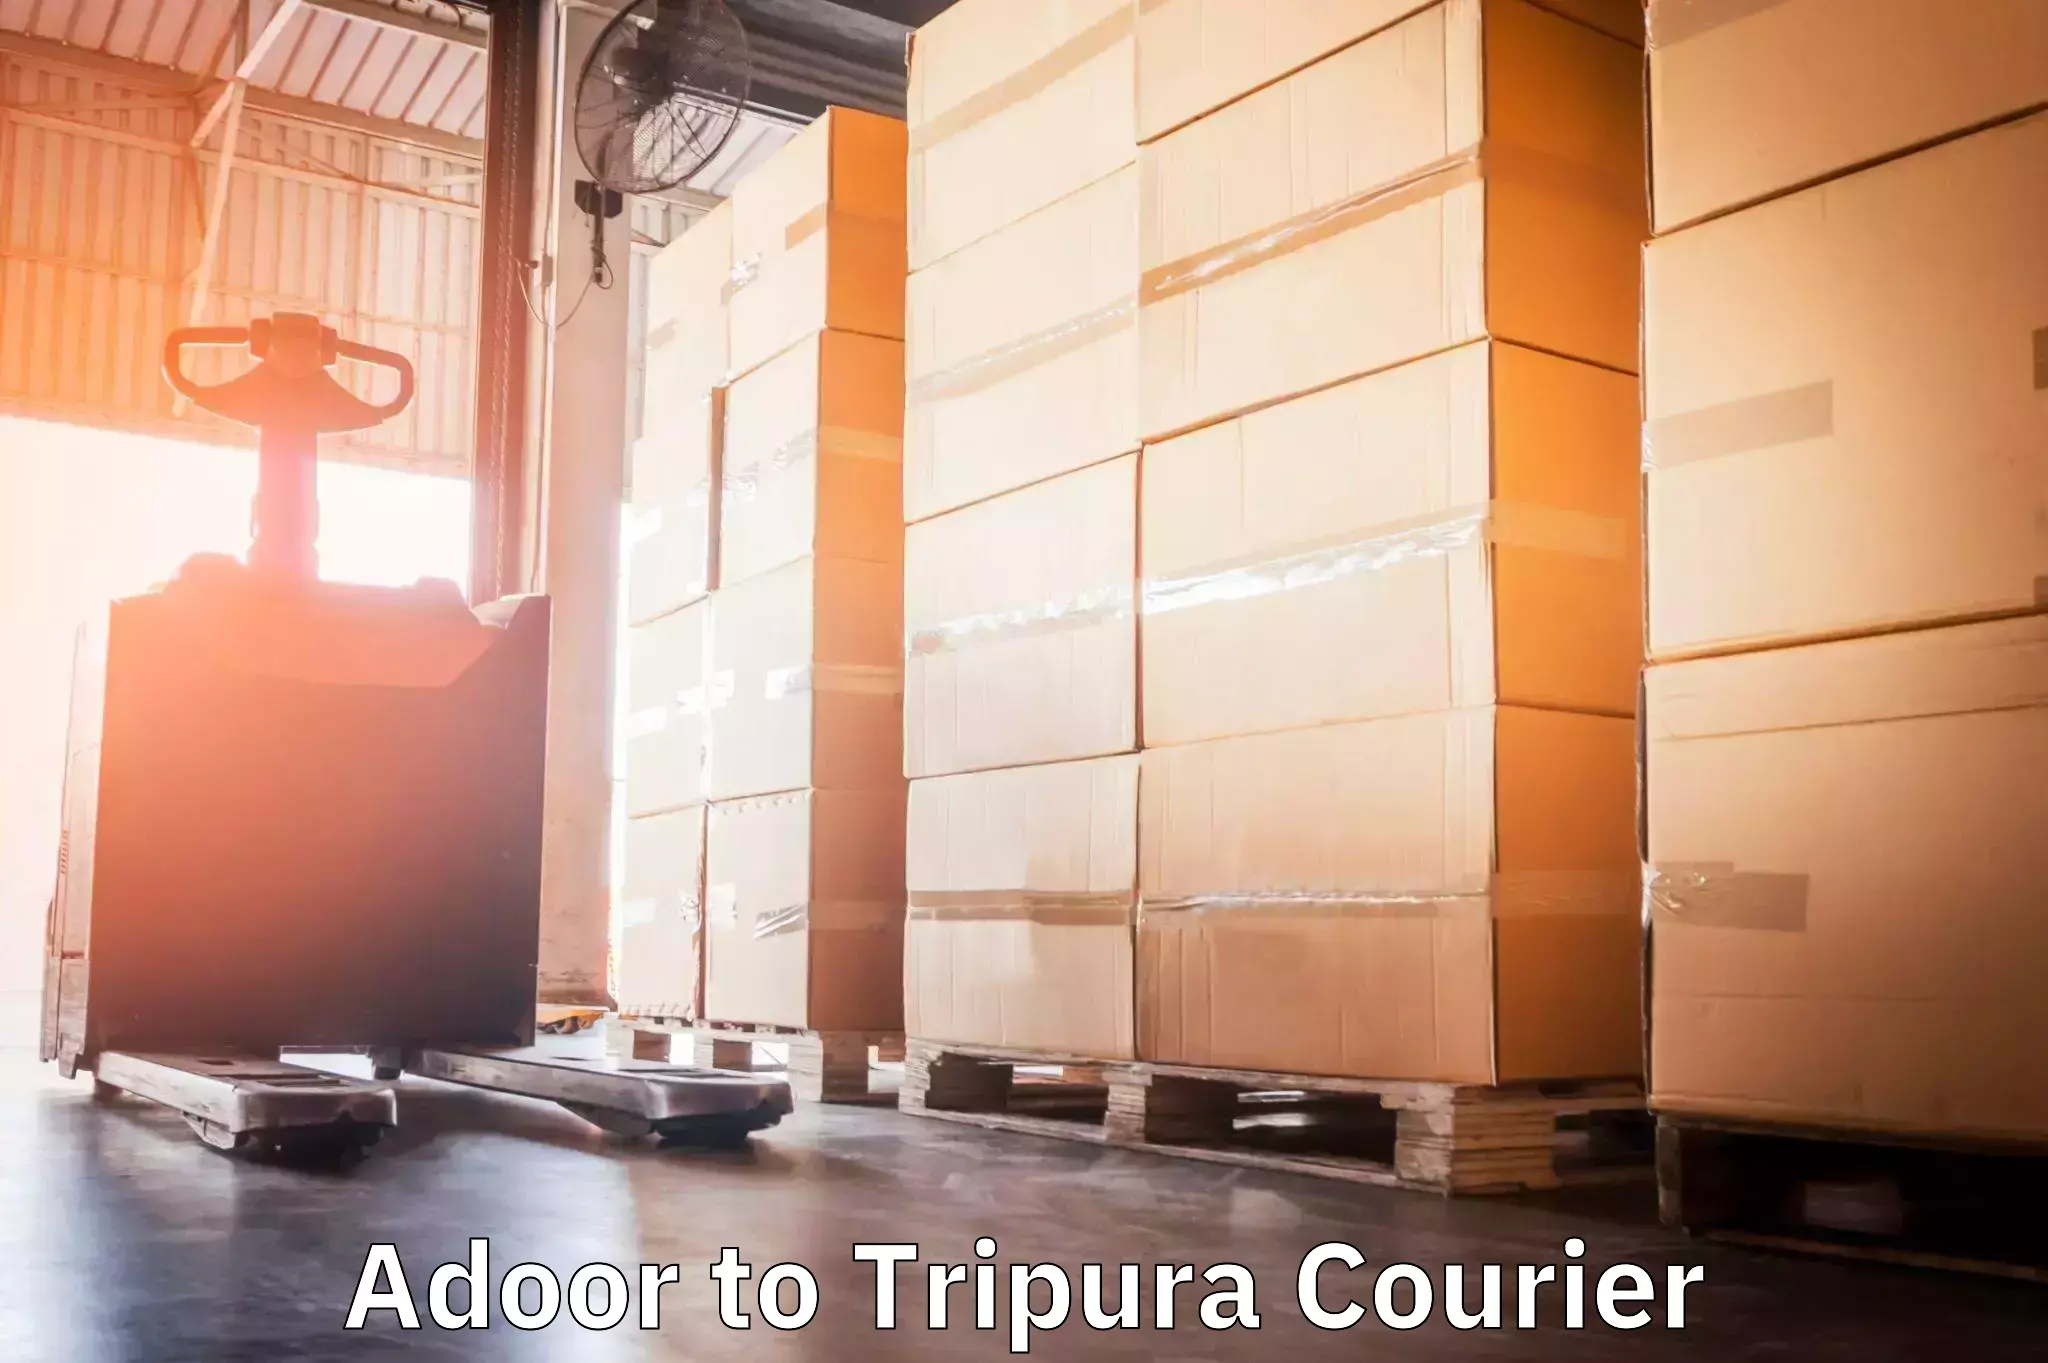 Budget-friendly shipping Adoor to Udaipur Tripura